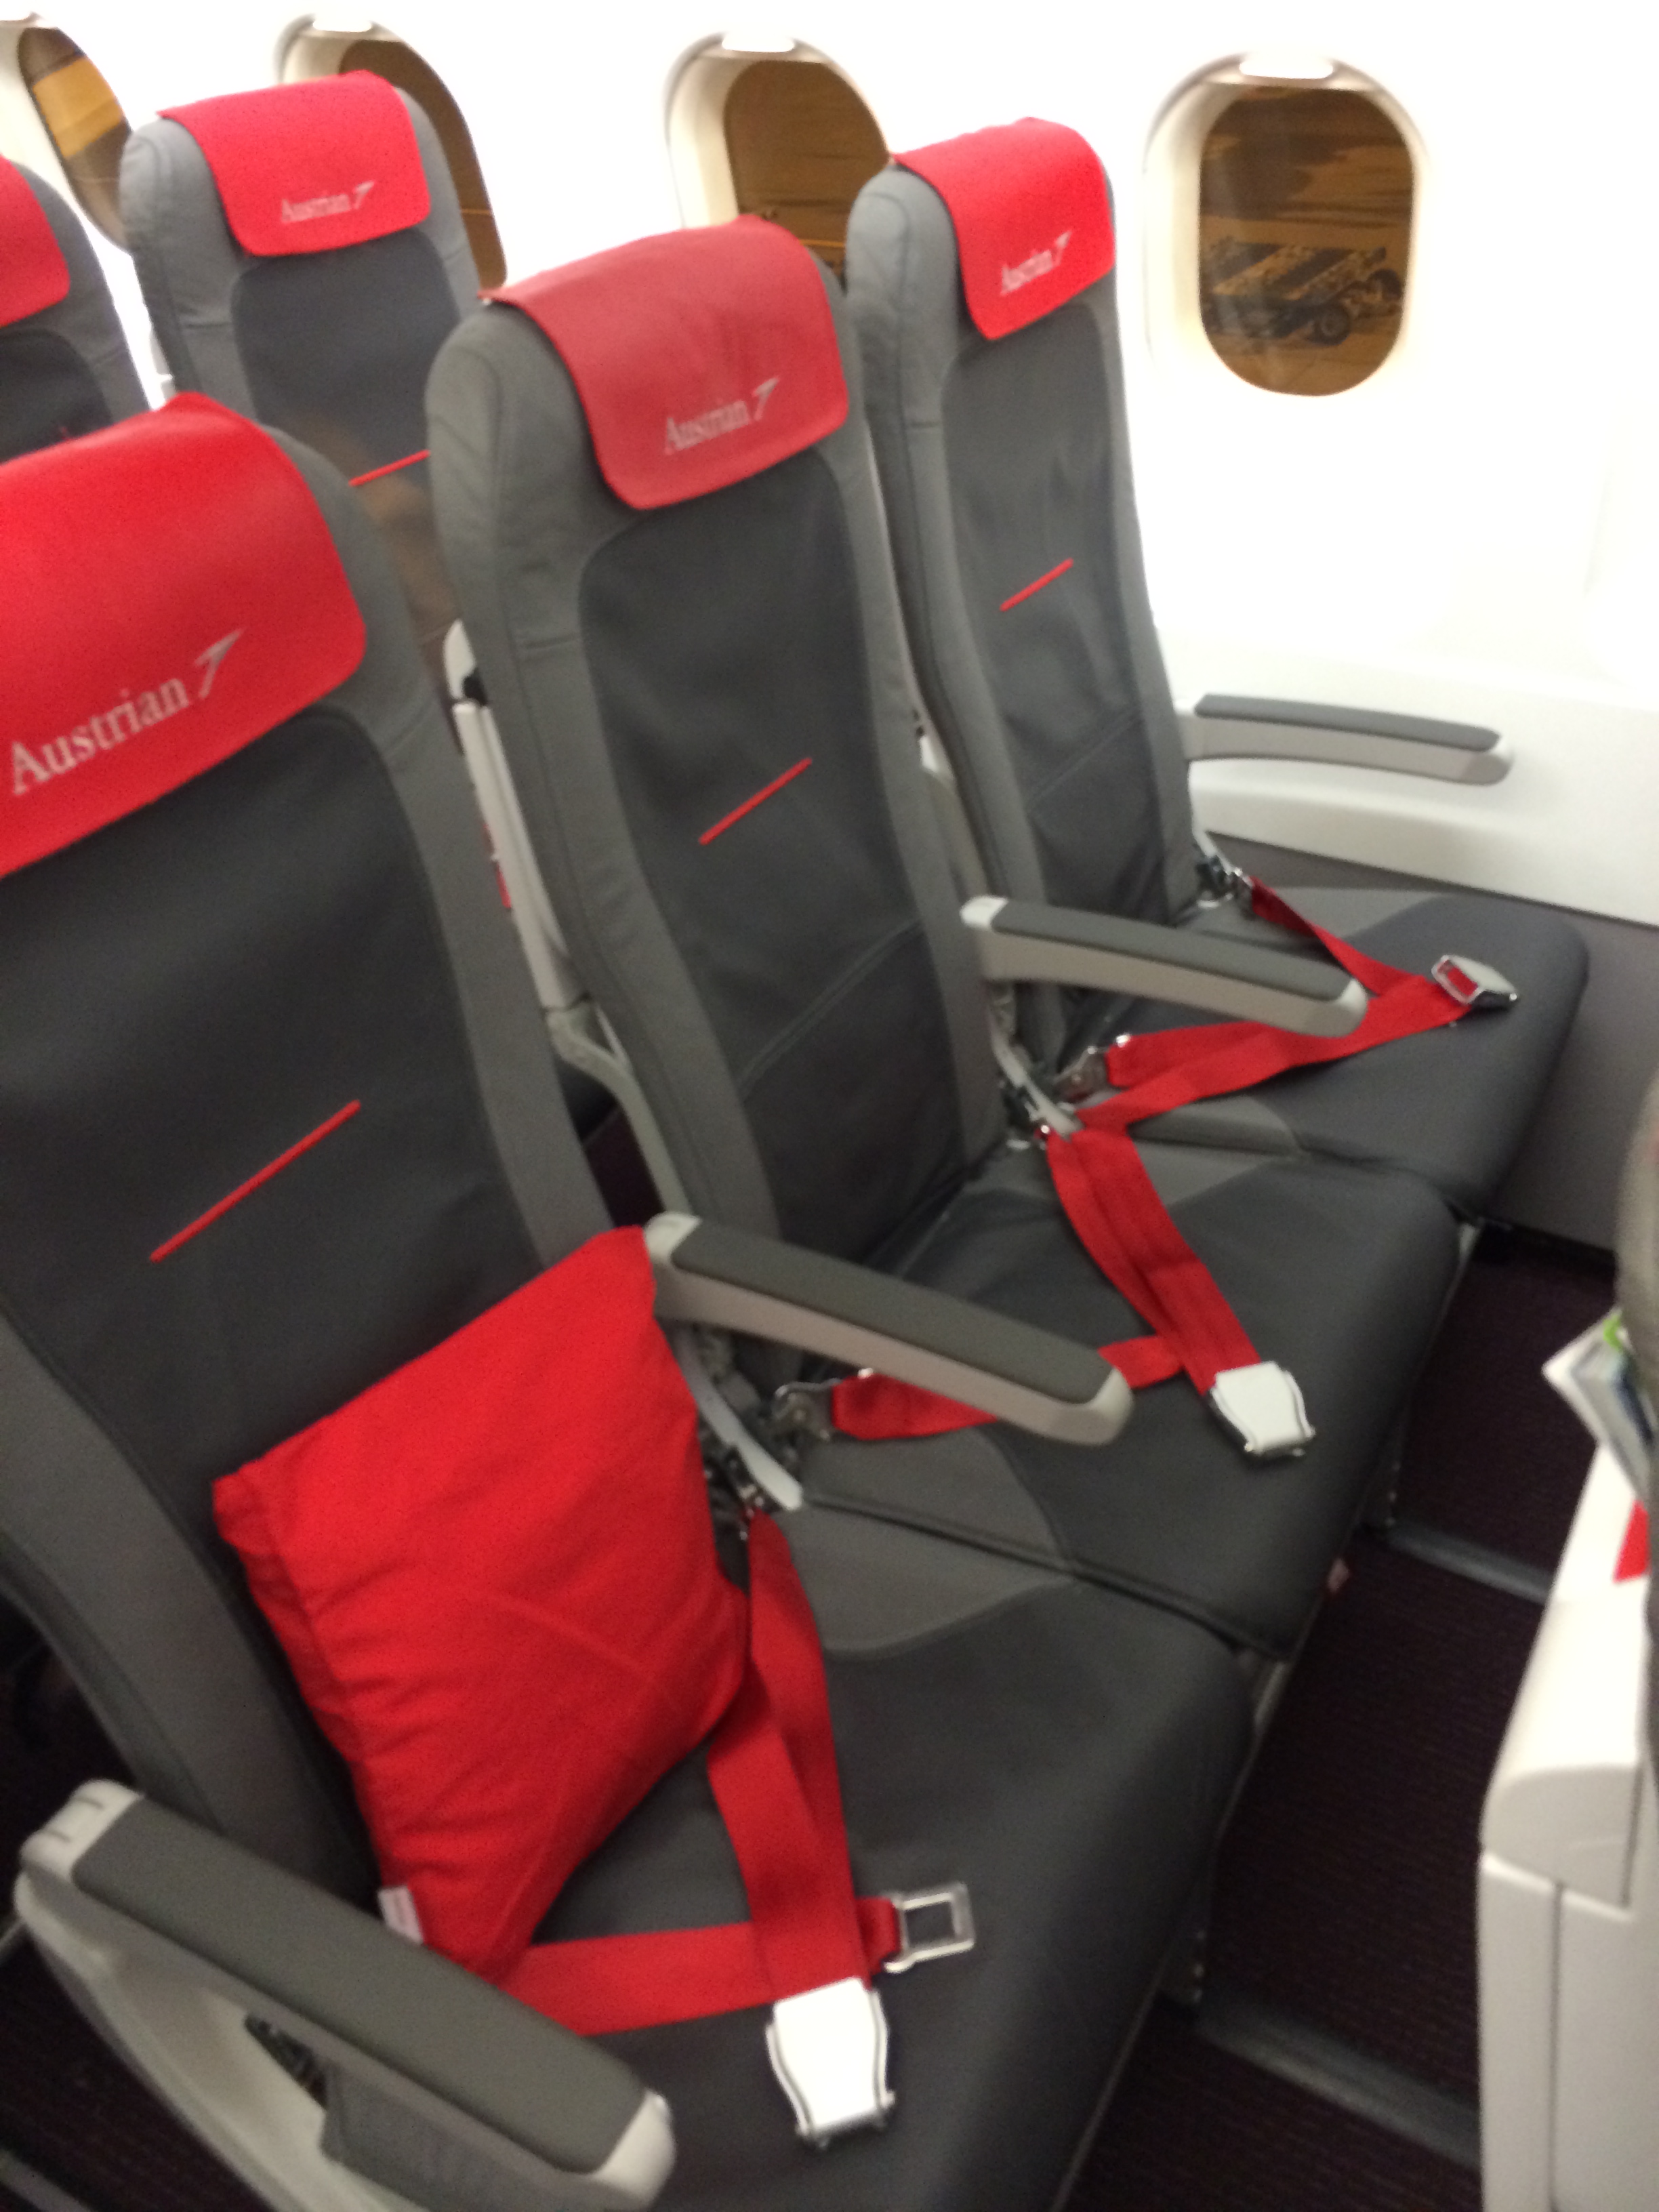 Seats on the A320